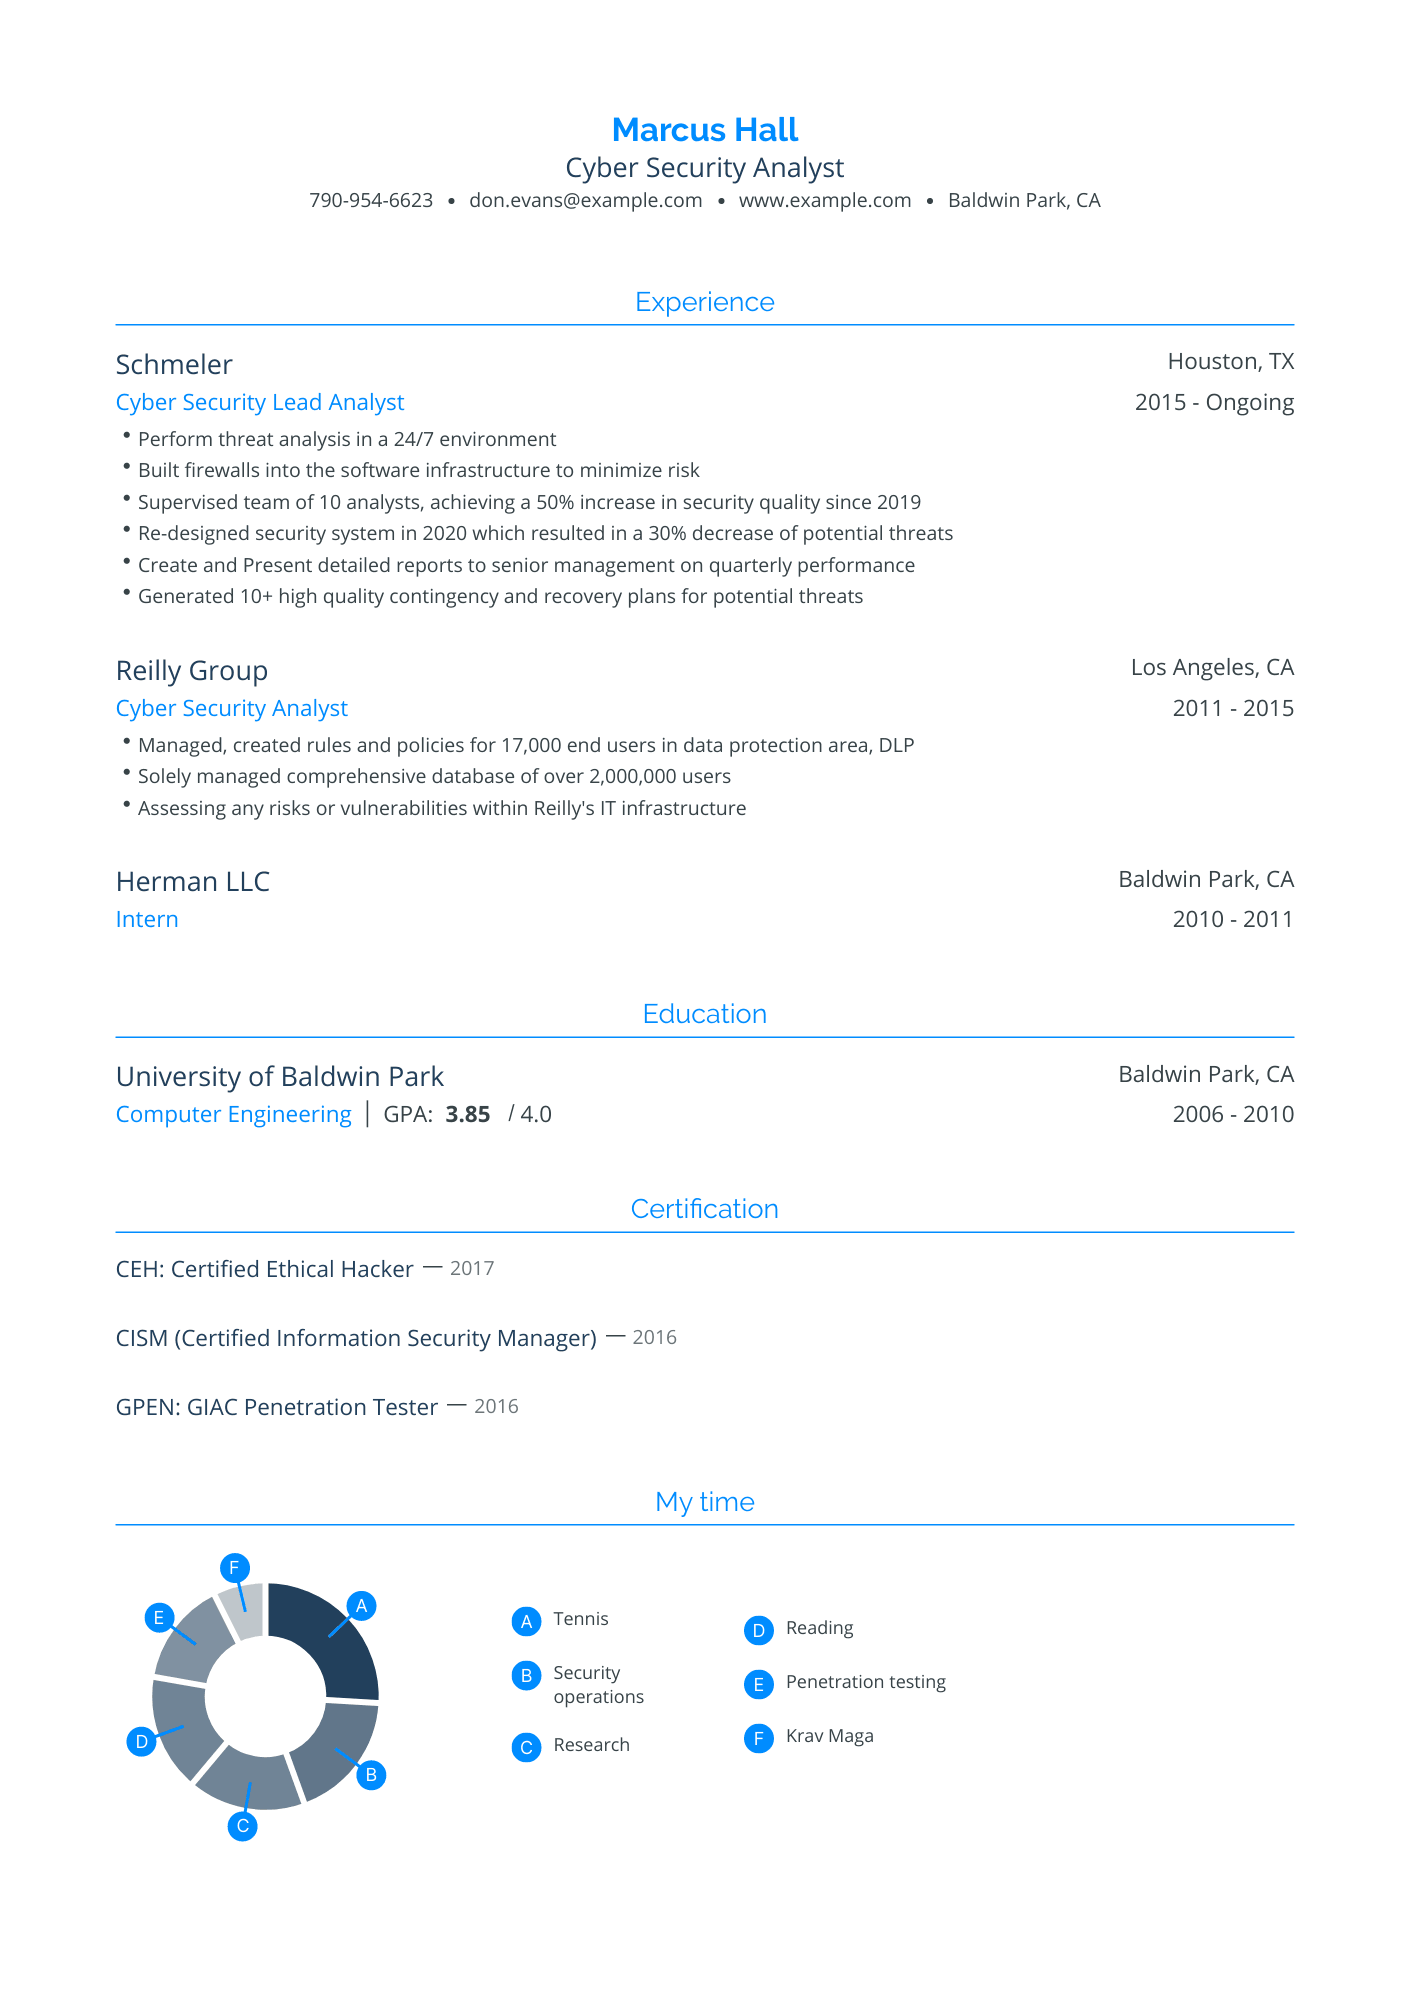 Traditional Cyber Security Analyst Resume Template